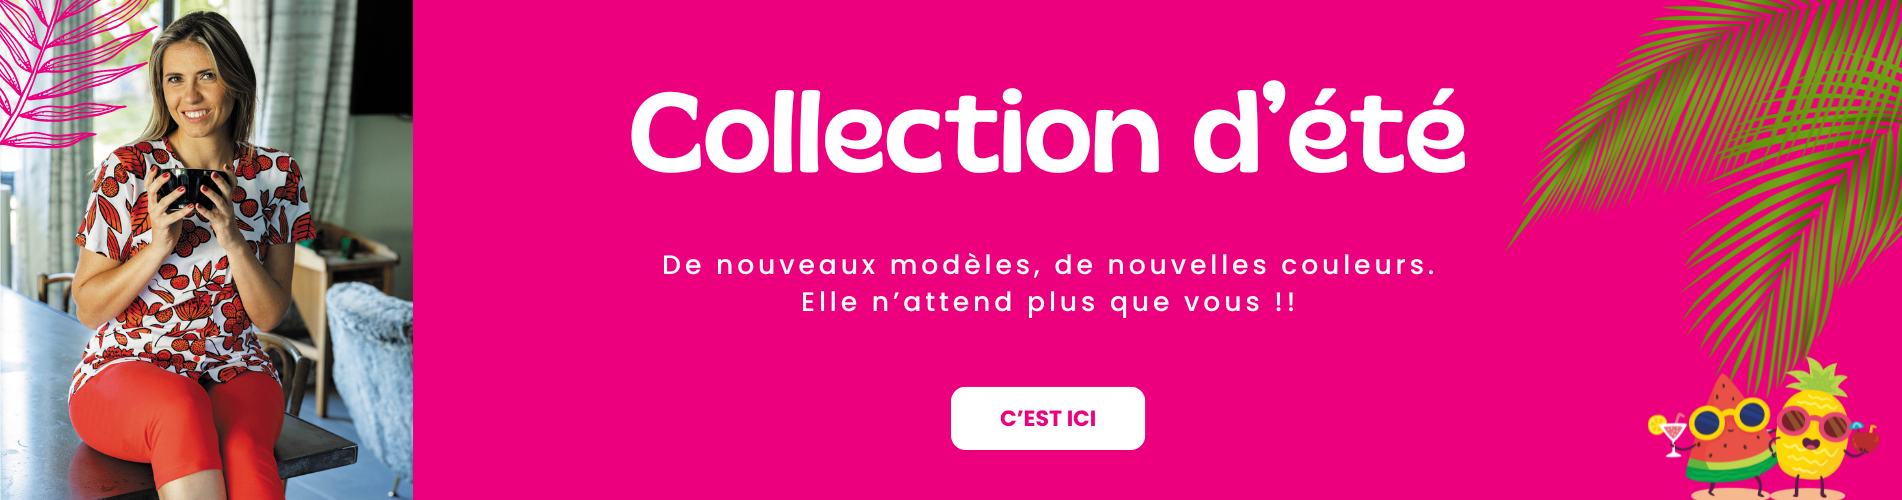 Collection vacance